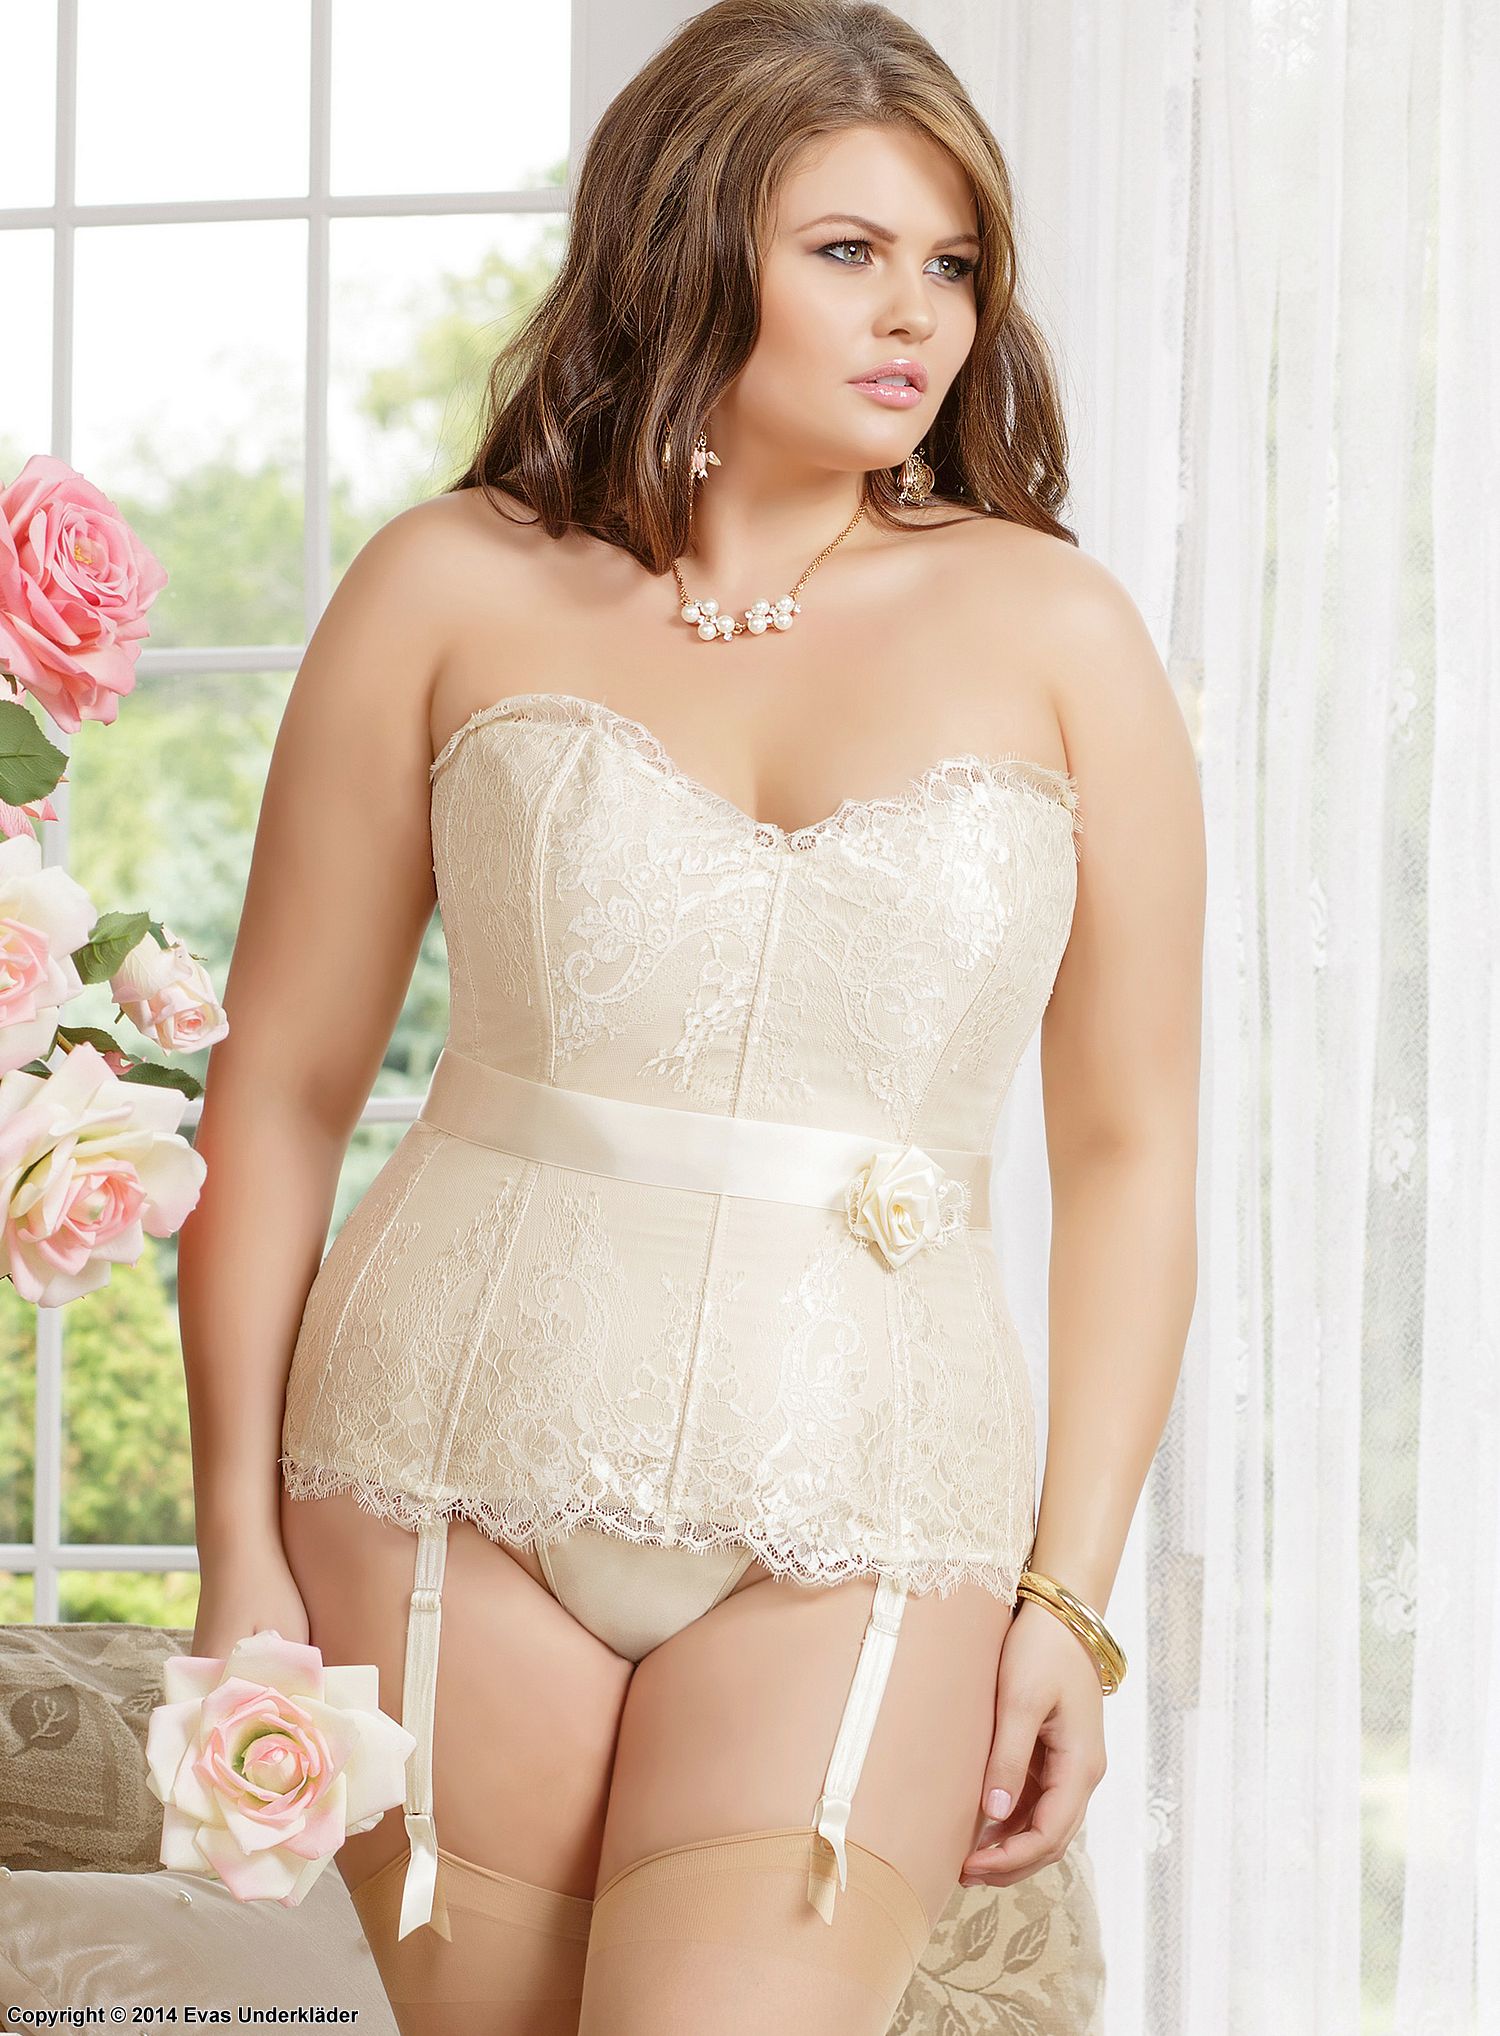 Cute chubby in white lace